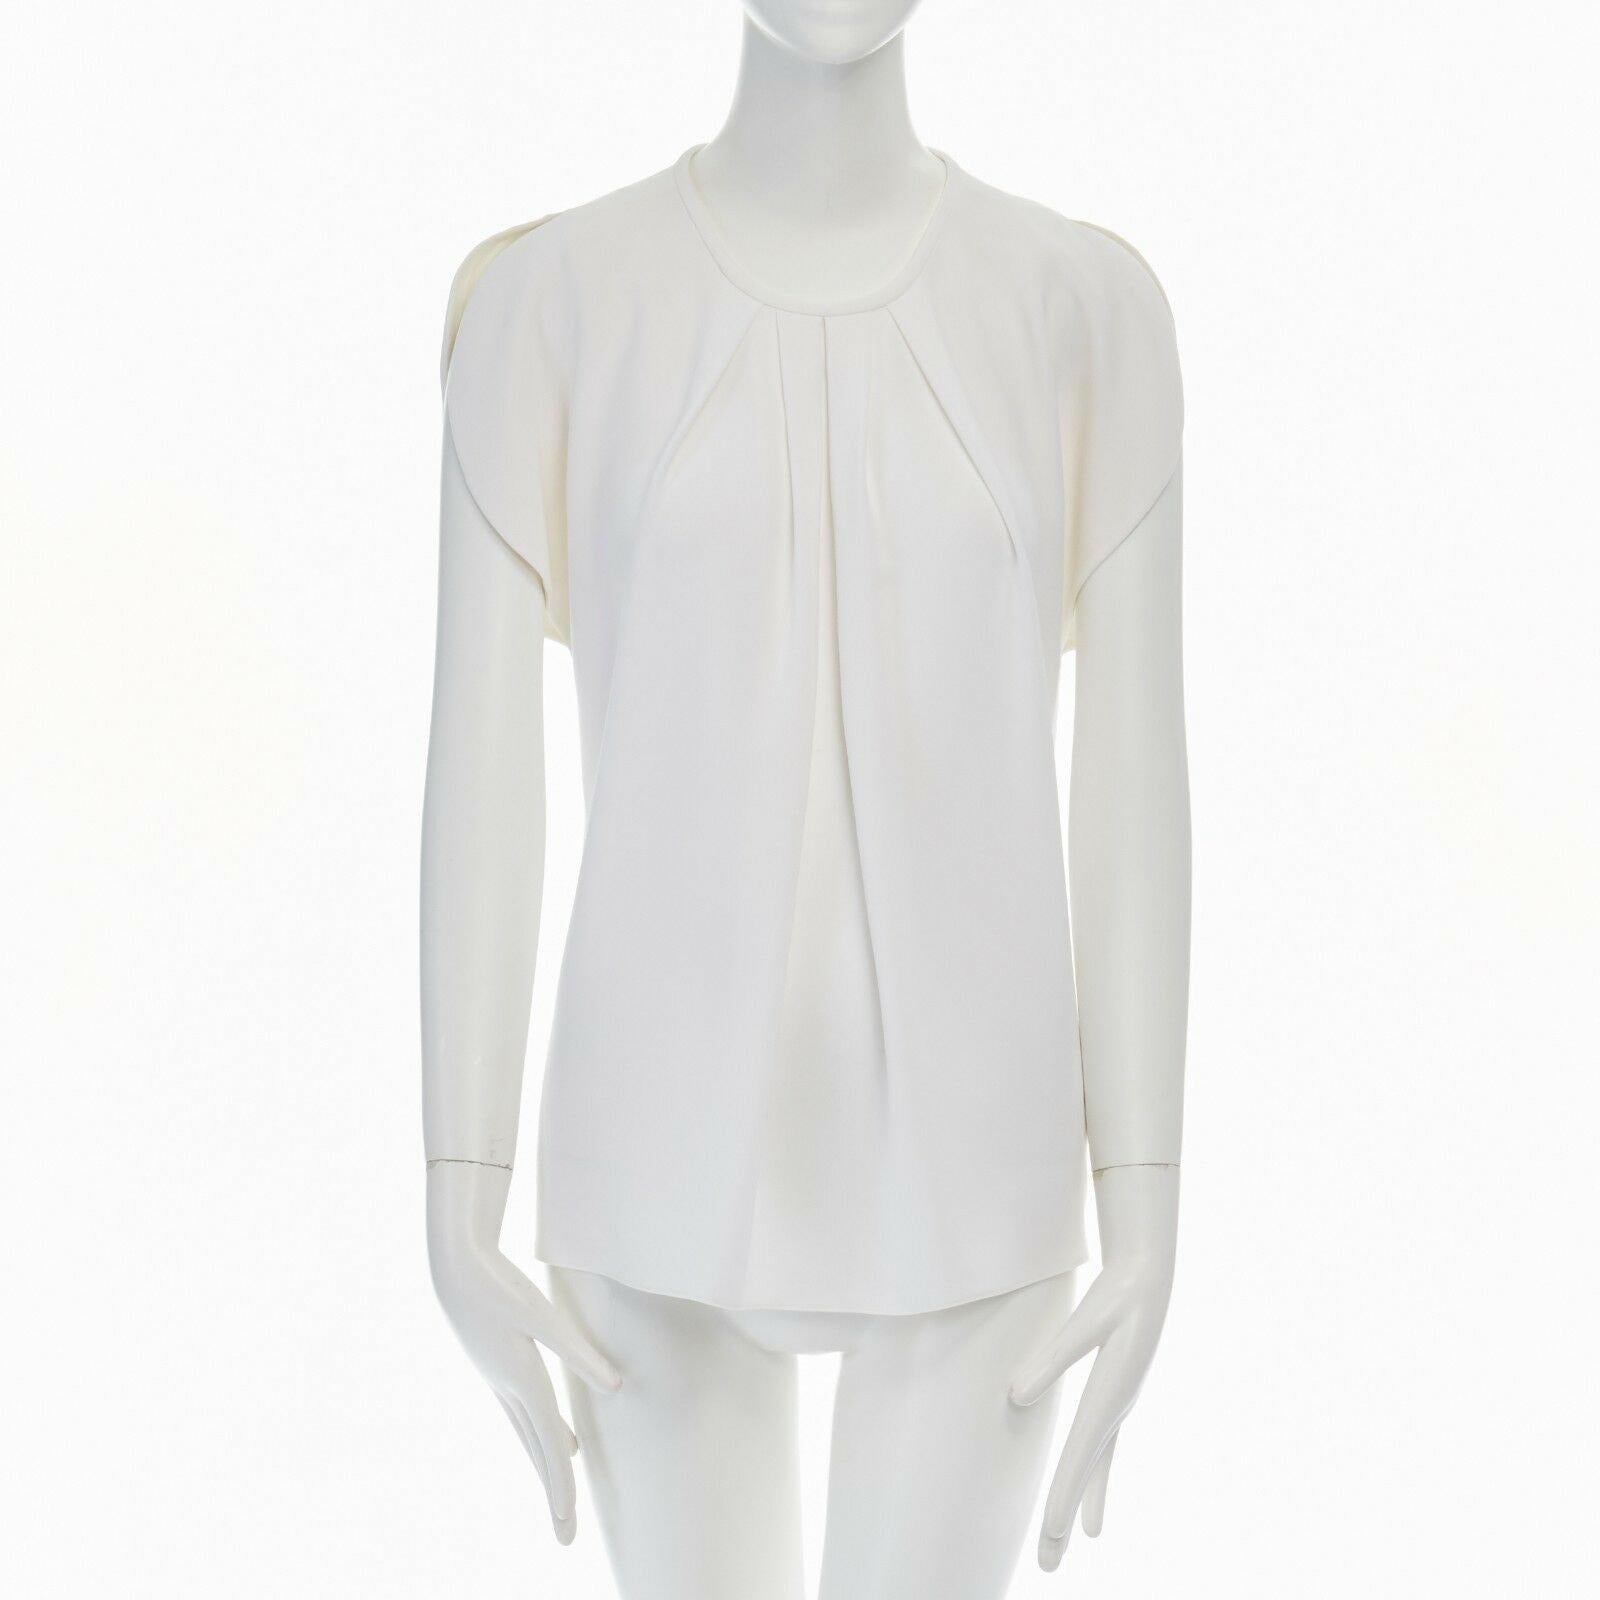 BALENCIAGA 2012 white crepe rounded sleeves blouse top FR36 S 
Reference: CC/AECG00084 
Brand: Balenciaga 
Designer: Demna Gvasalia 
Collection: 2012 
Material: Acetate 
Color: White 
Pattern: Solid 
Extra Detail: Triacetate, polyester, silk. White.